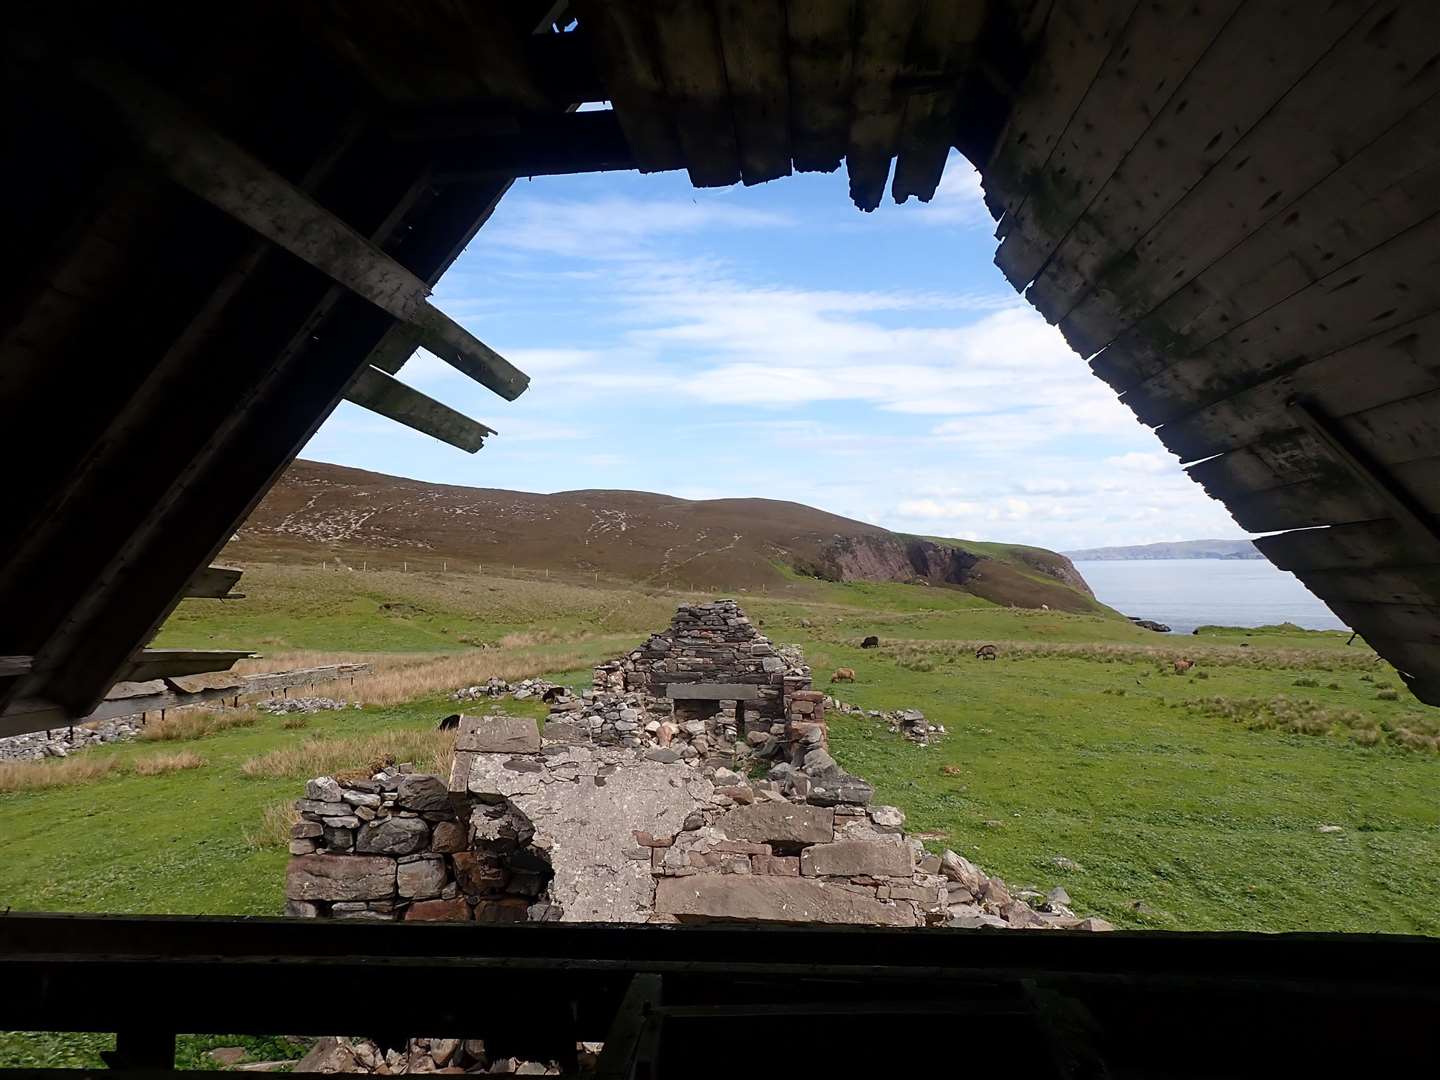 Looking out of one of the old houses.